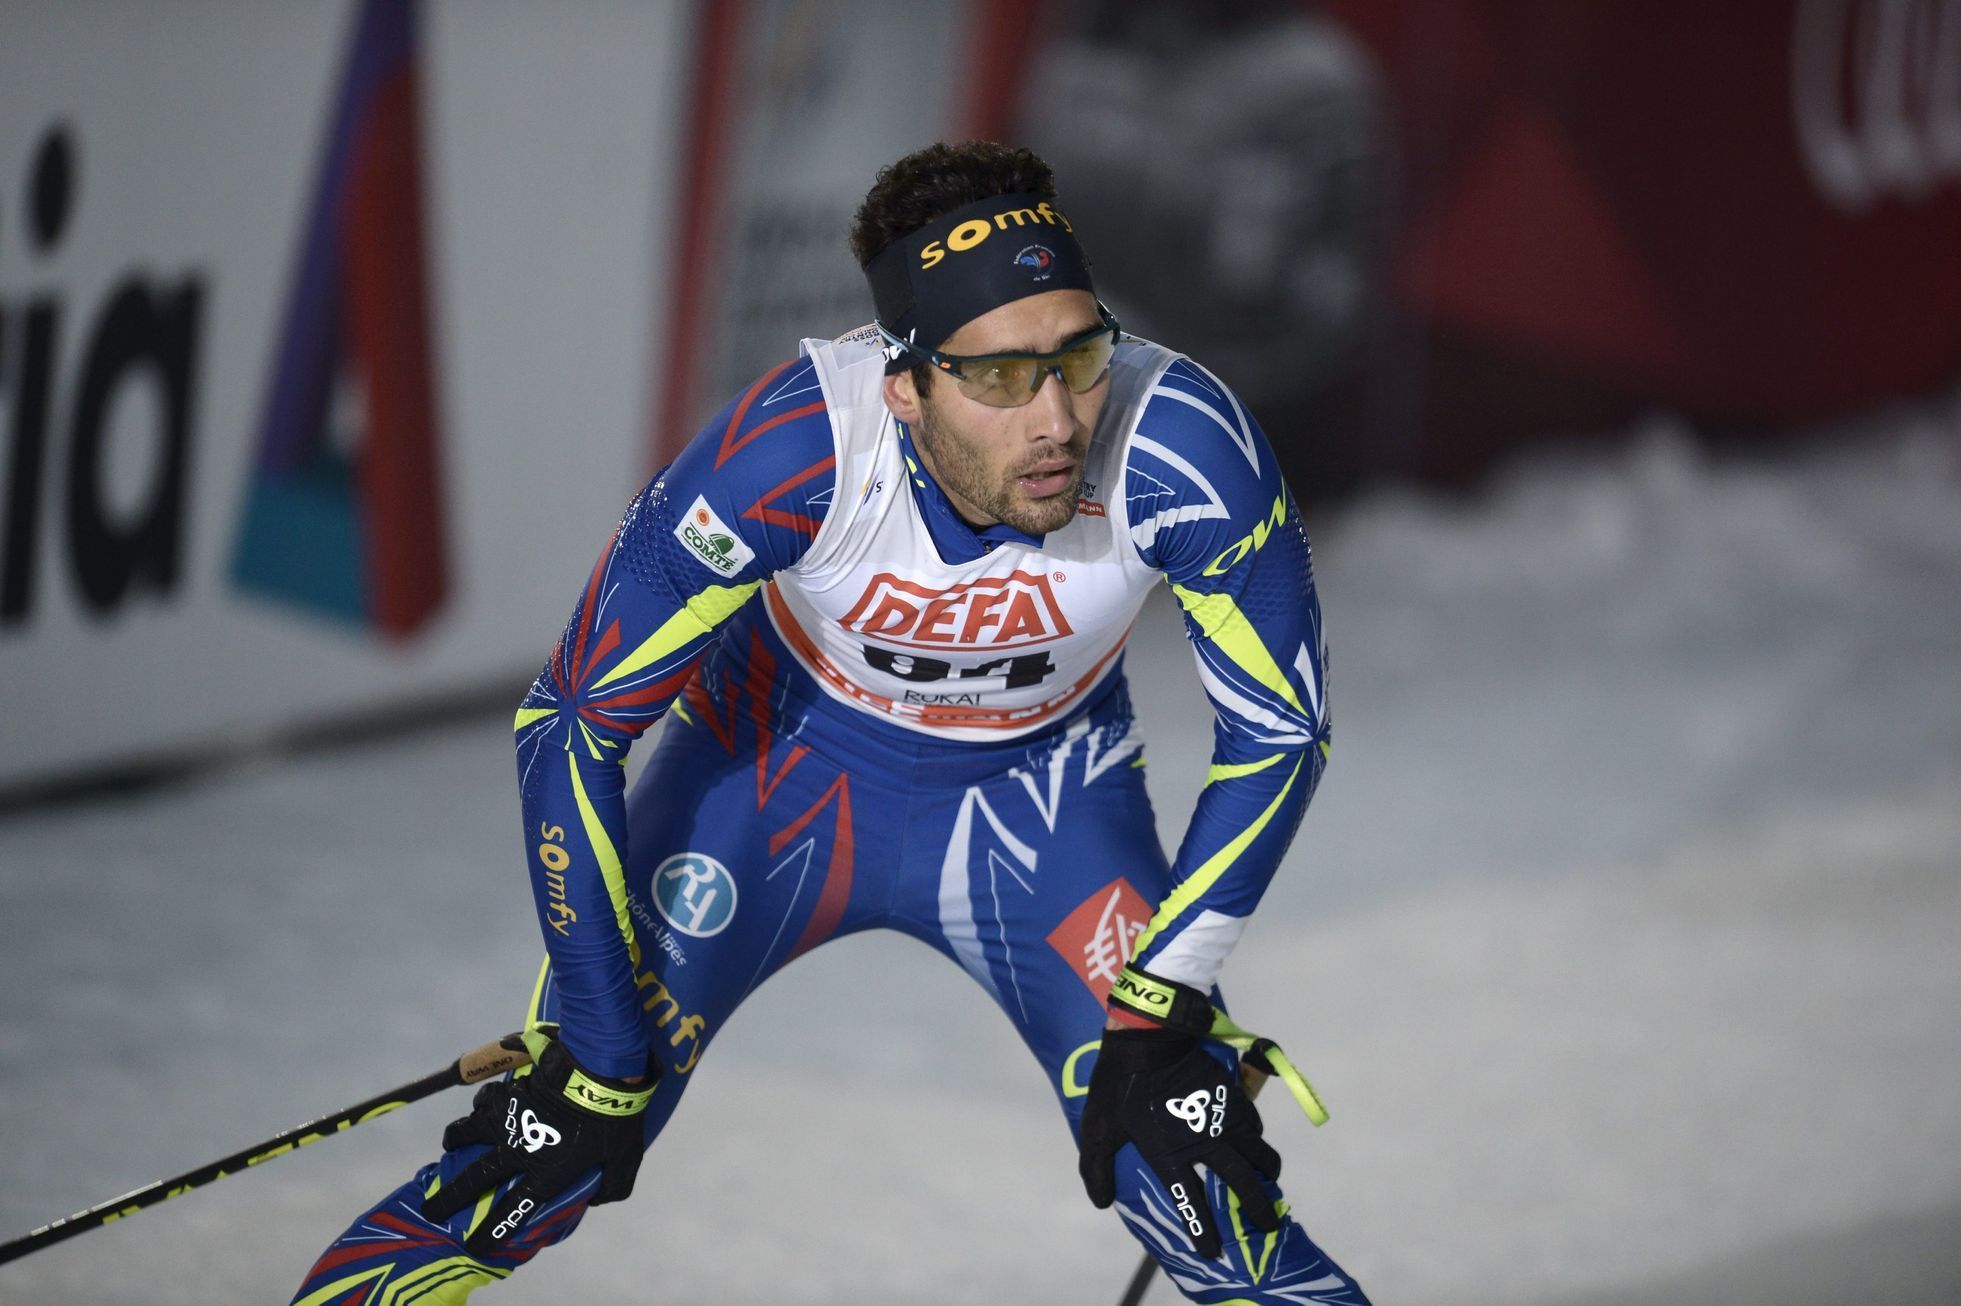 Biathlon World Cup and Olympic champion Martin Fourcade of France reacts after his performance in the men's free Cross Country 10km competiton at the FIS World Cup Ruka Nordic 2015 event in Kuusamo